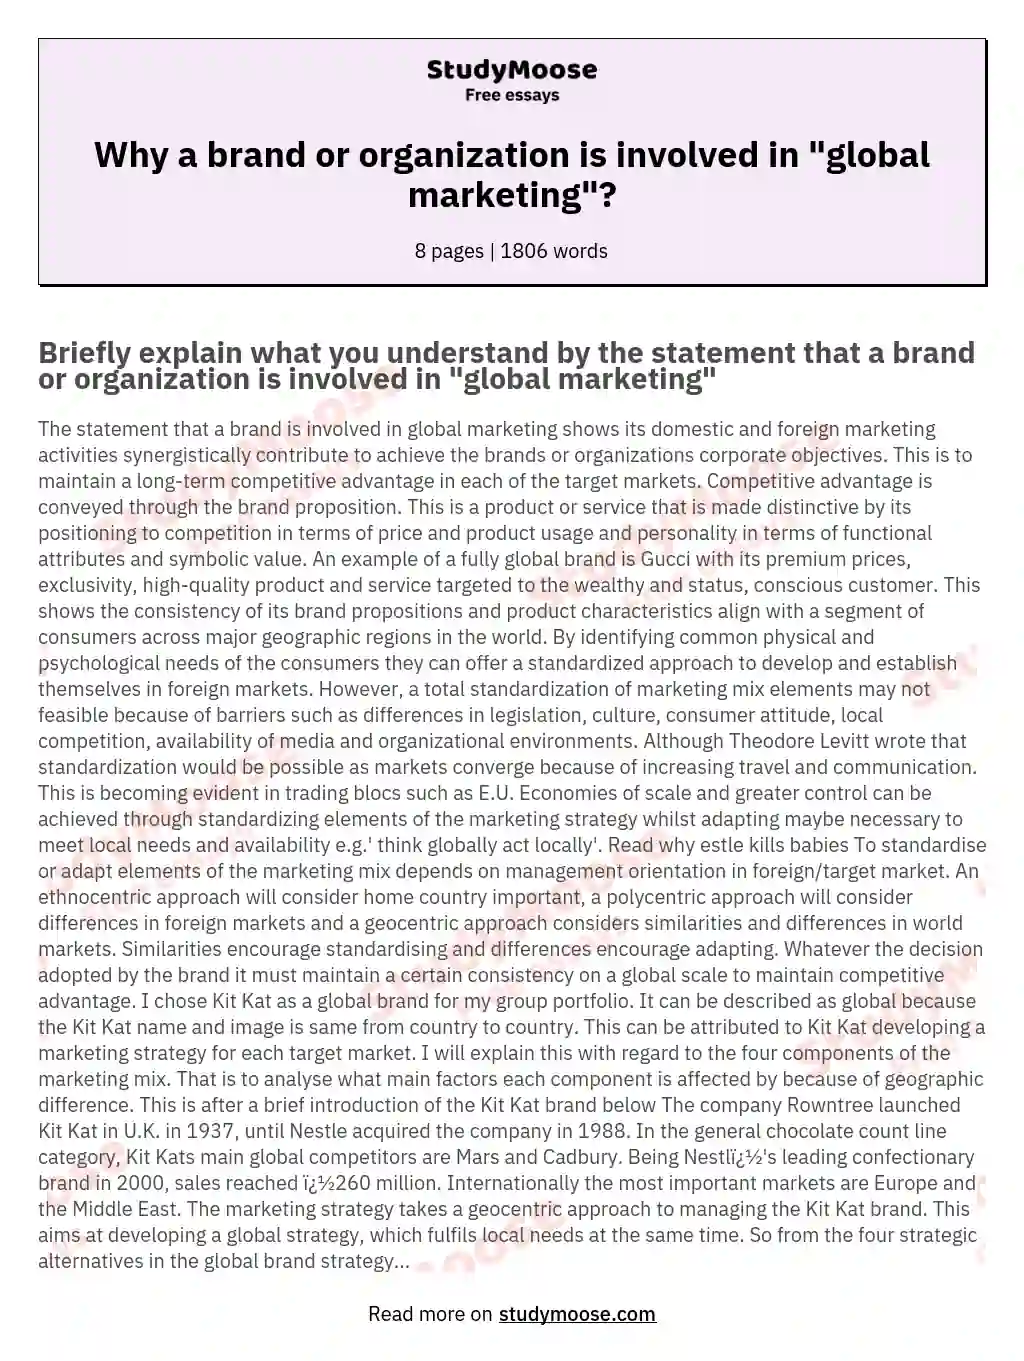 Why a brand or organization is involved in "global marketing"? essay